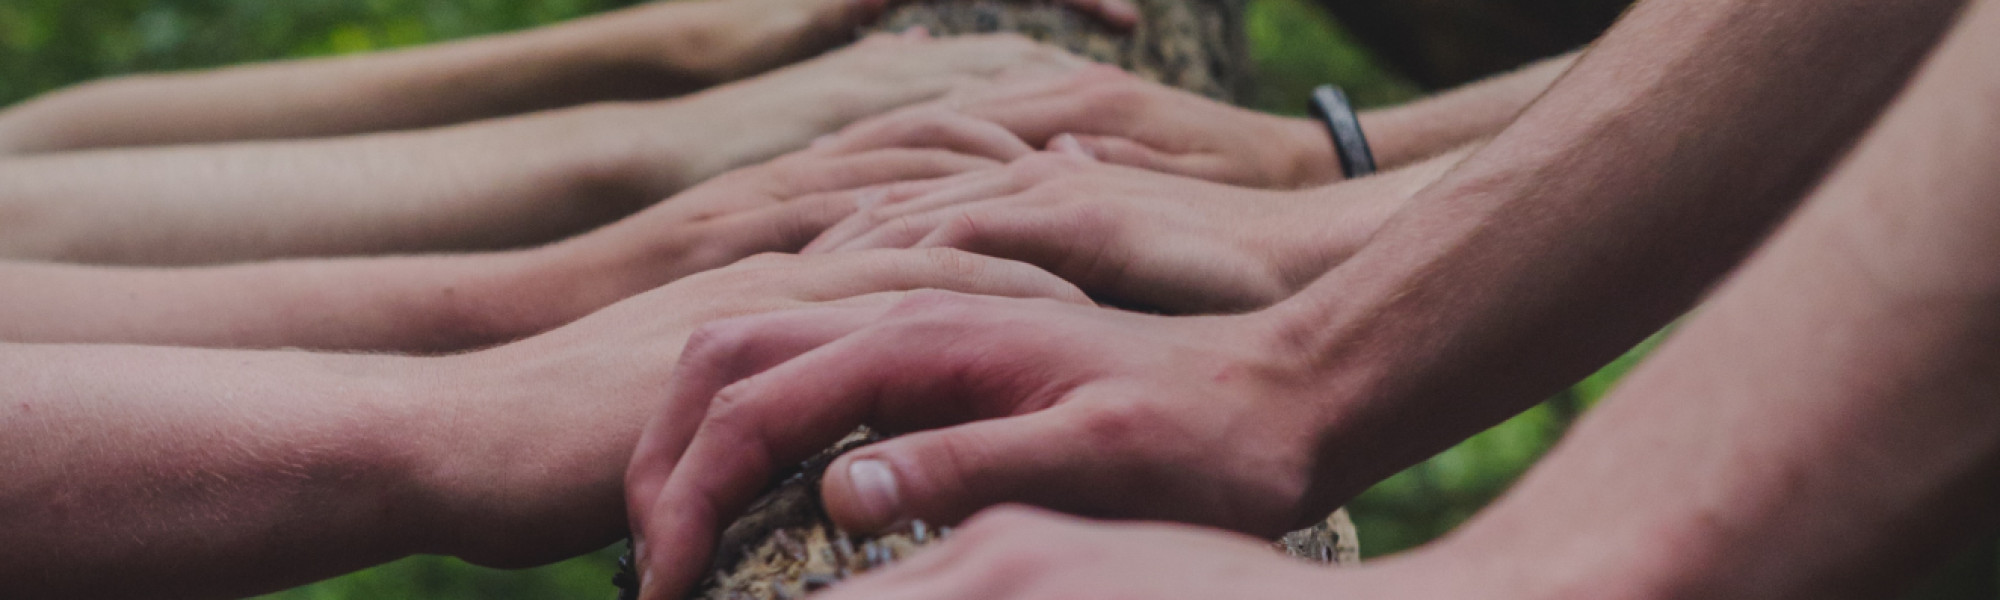 An image of several hands leaning on a tree log, showing teamworking